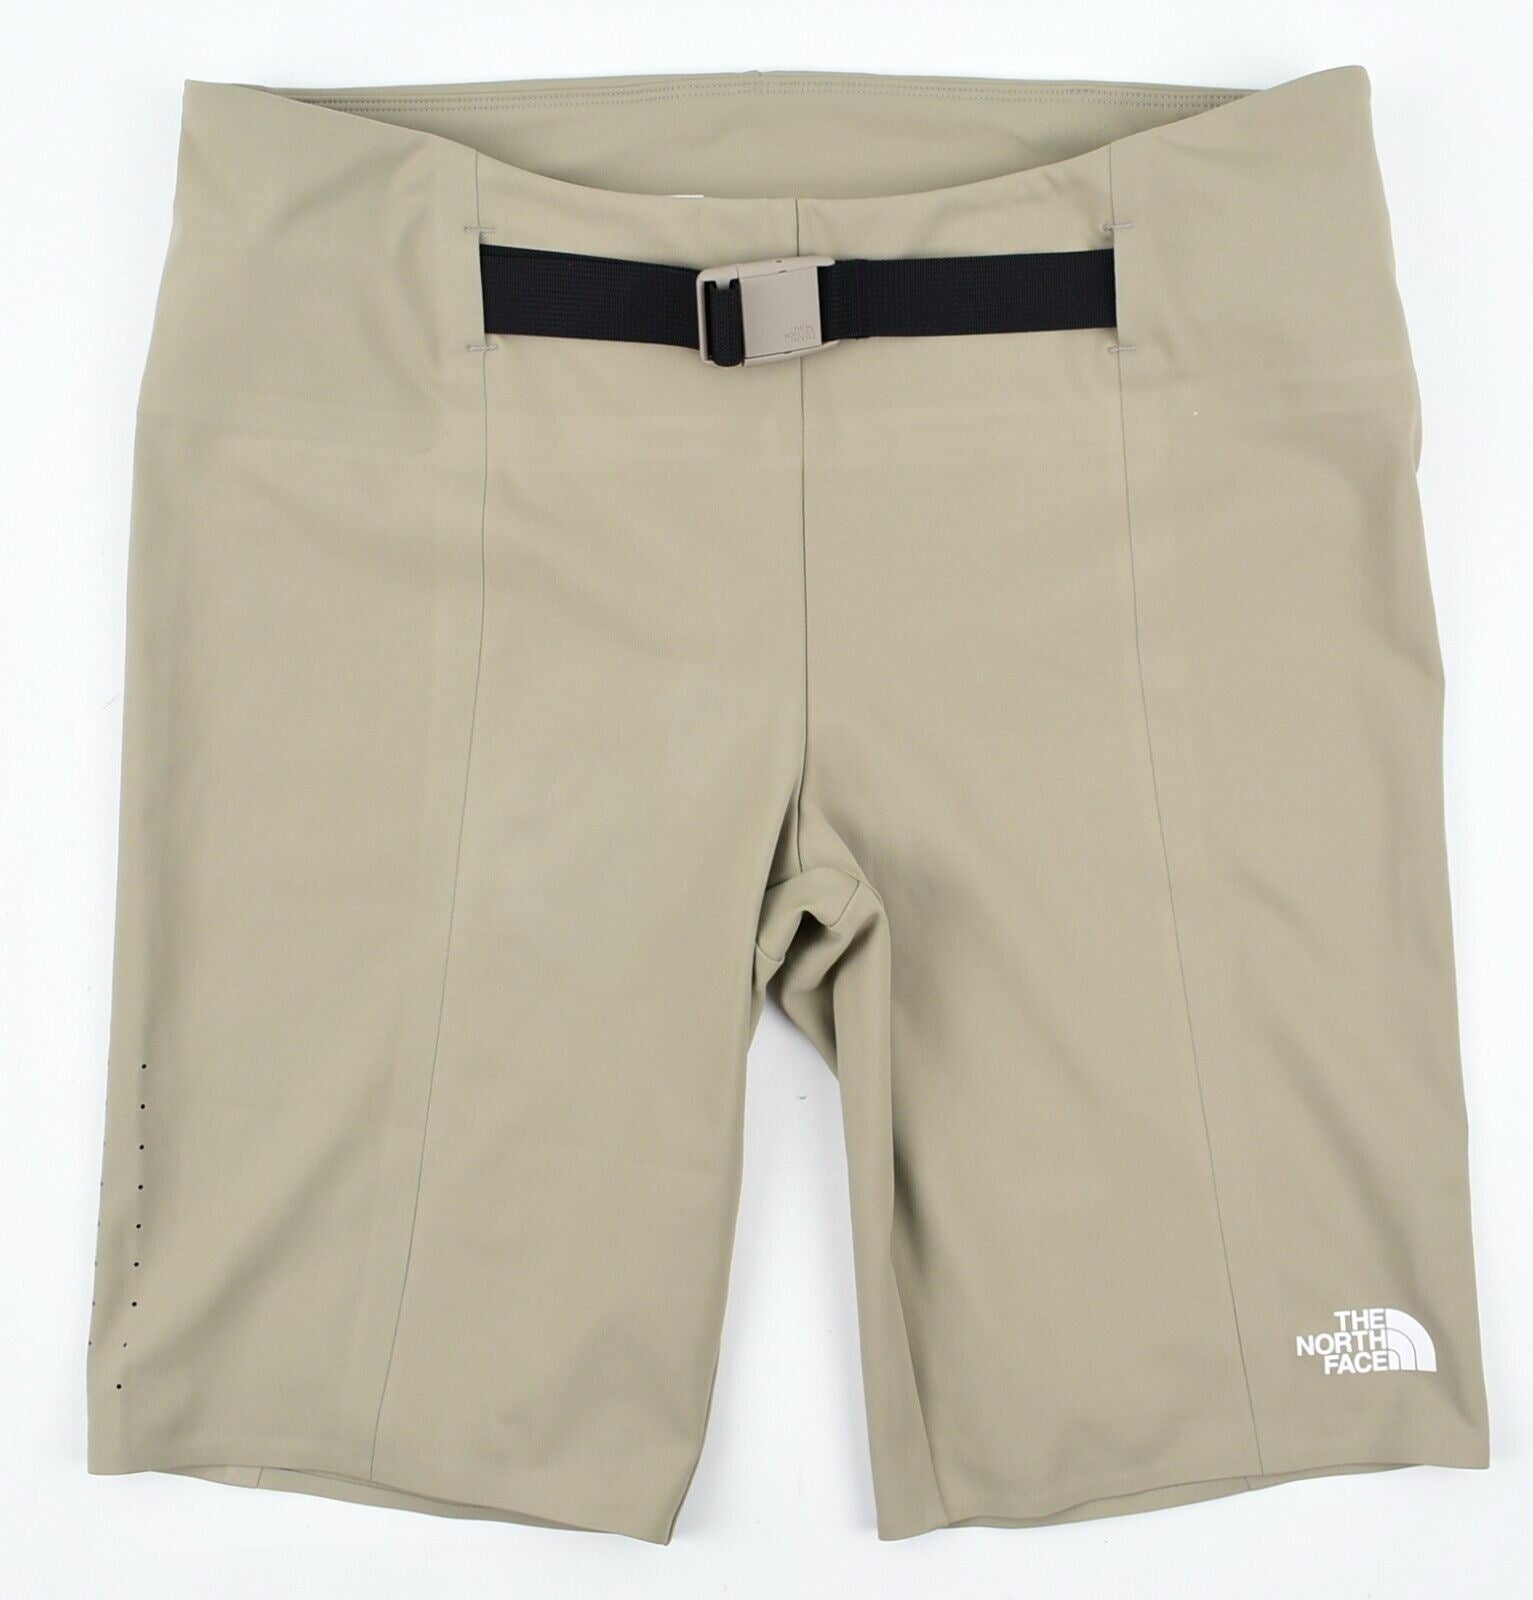 THE NORTH FACE Womens Waist Pack Outdoor Shorts, Mineral Grey, size L / UK 16